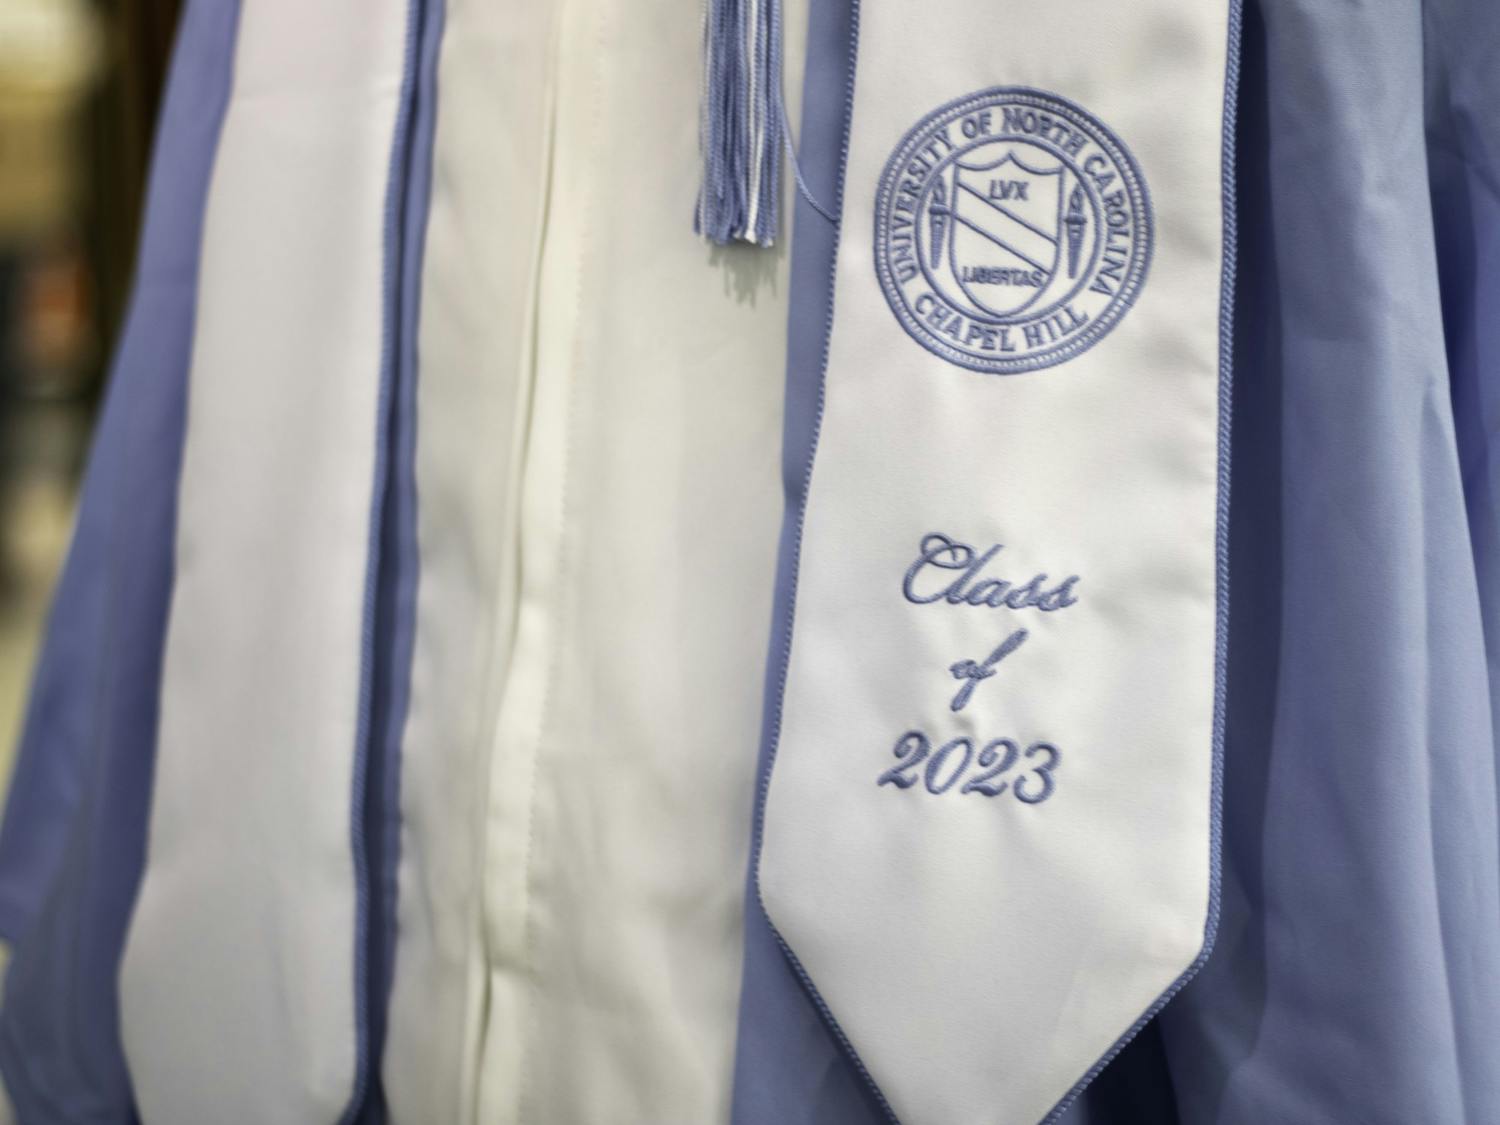 A UNC graduation gown being displayed in the Student Stores on Wednesday, April 12, 2023.